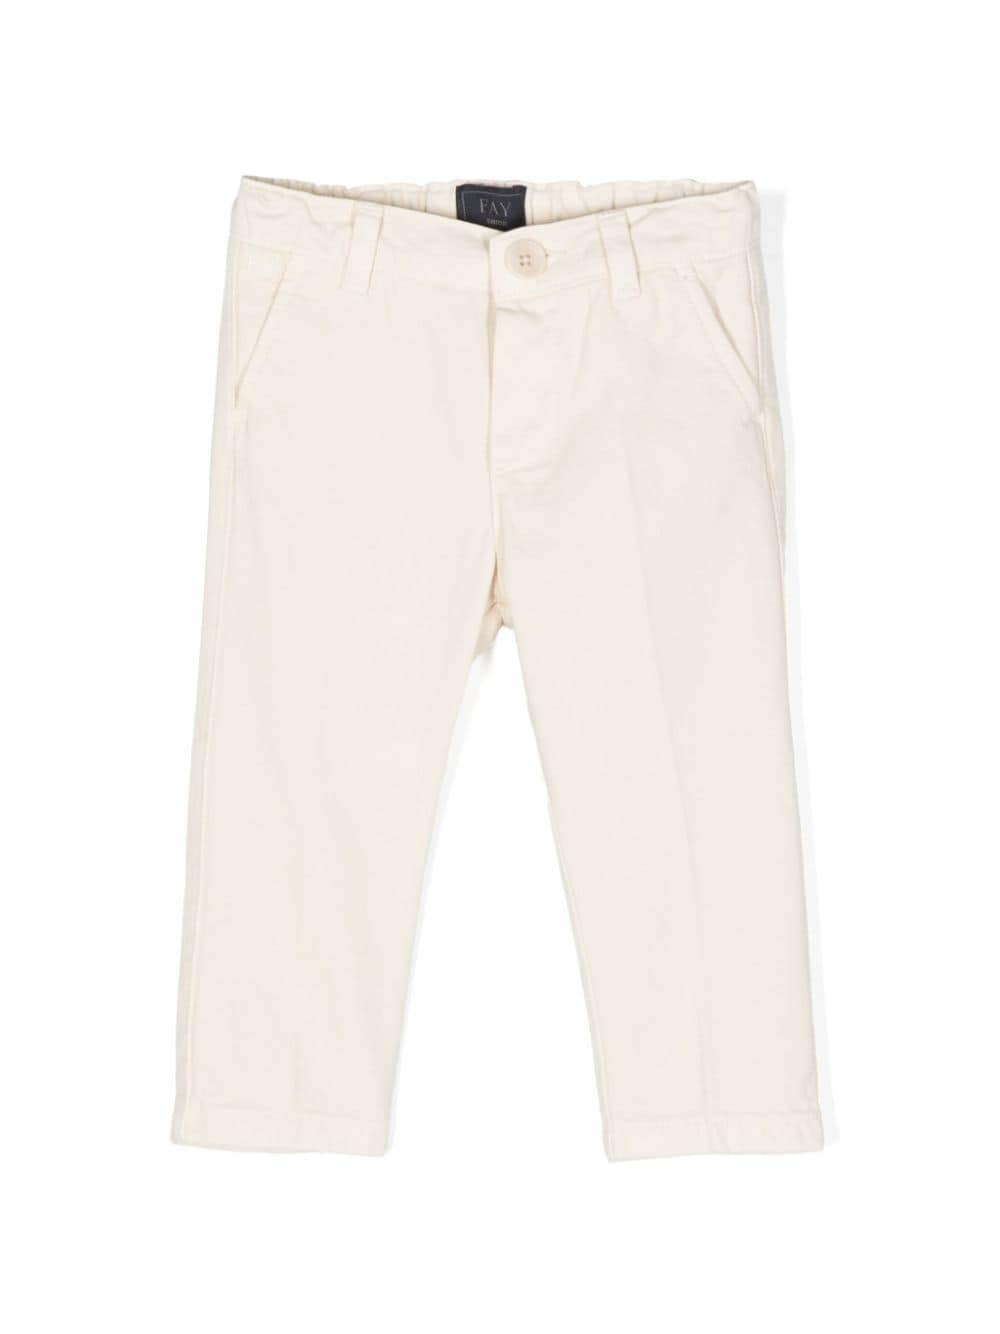 Fay Kids embroidered-logo trousers - Neutrals von Fay Kids